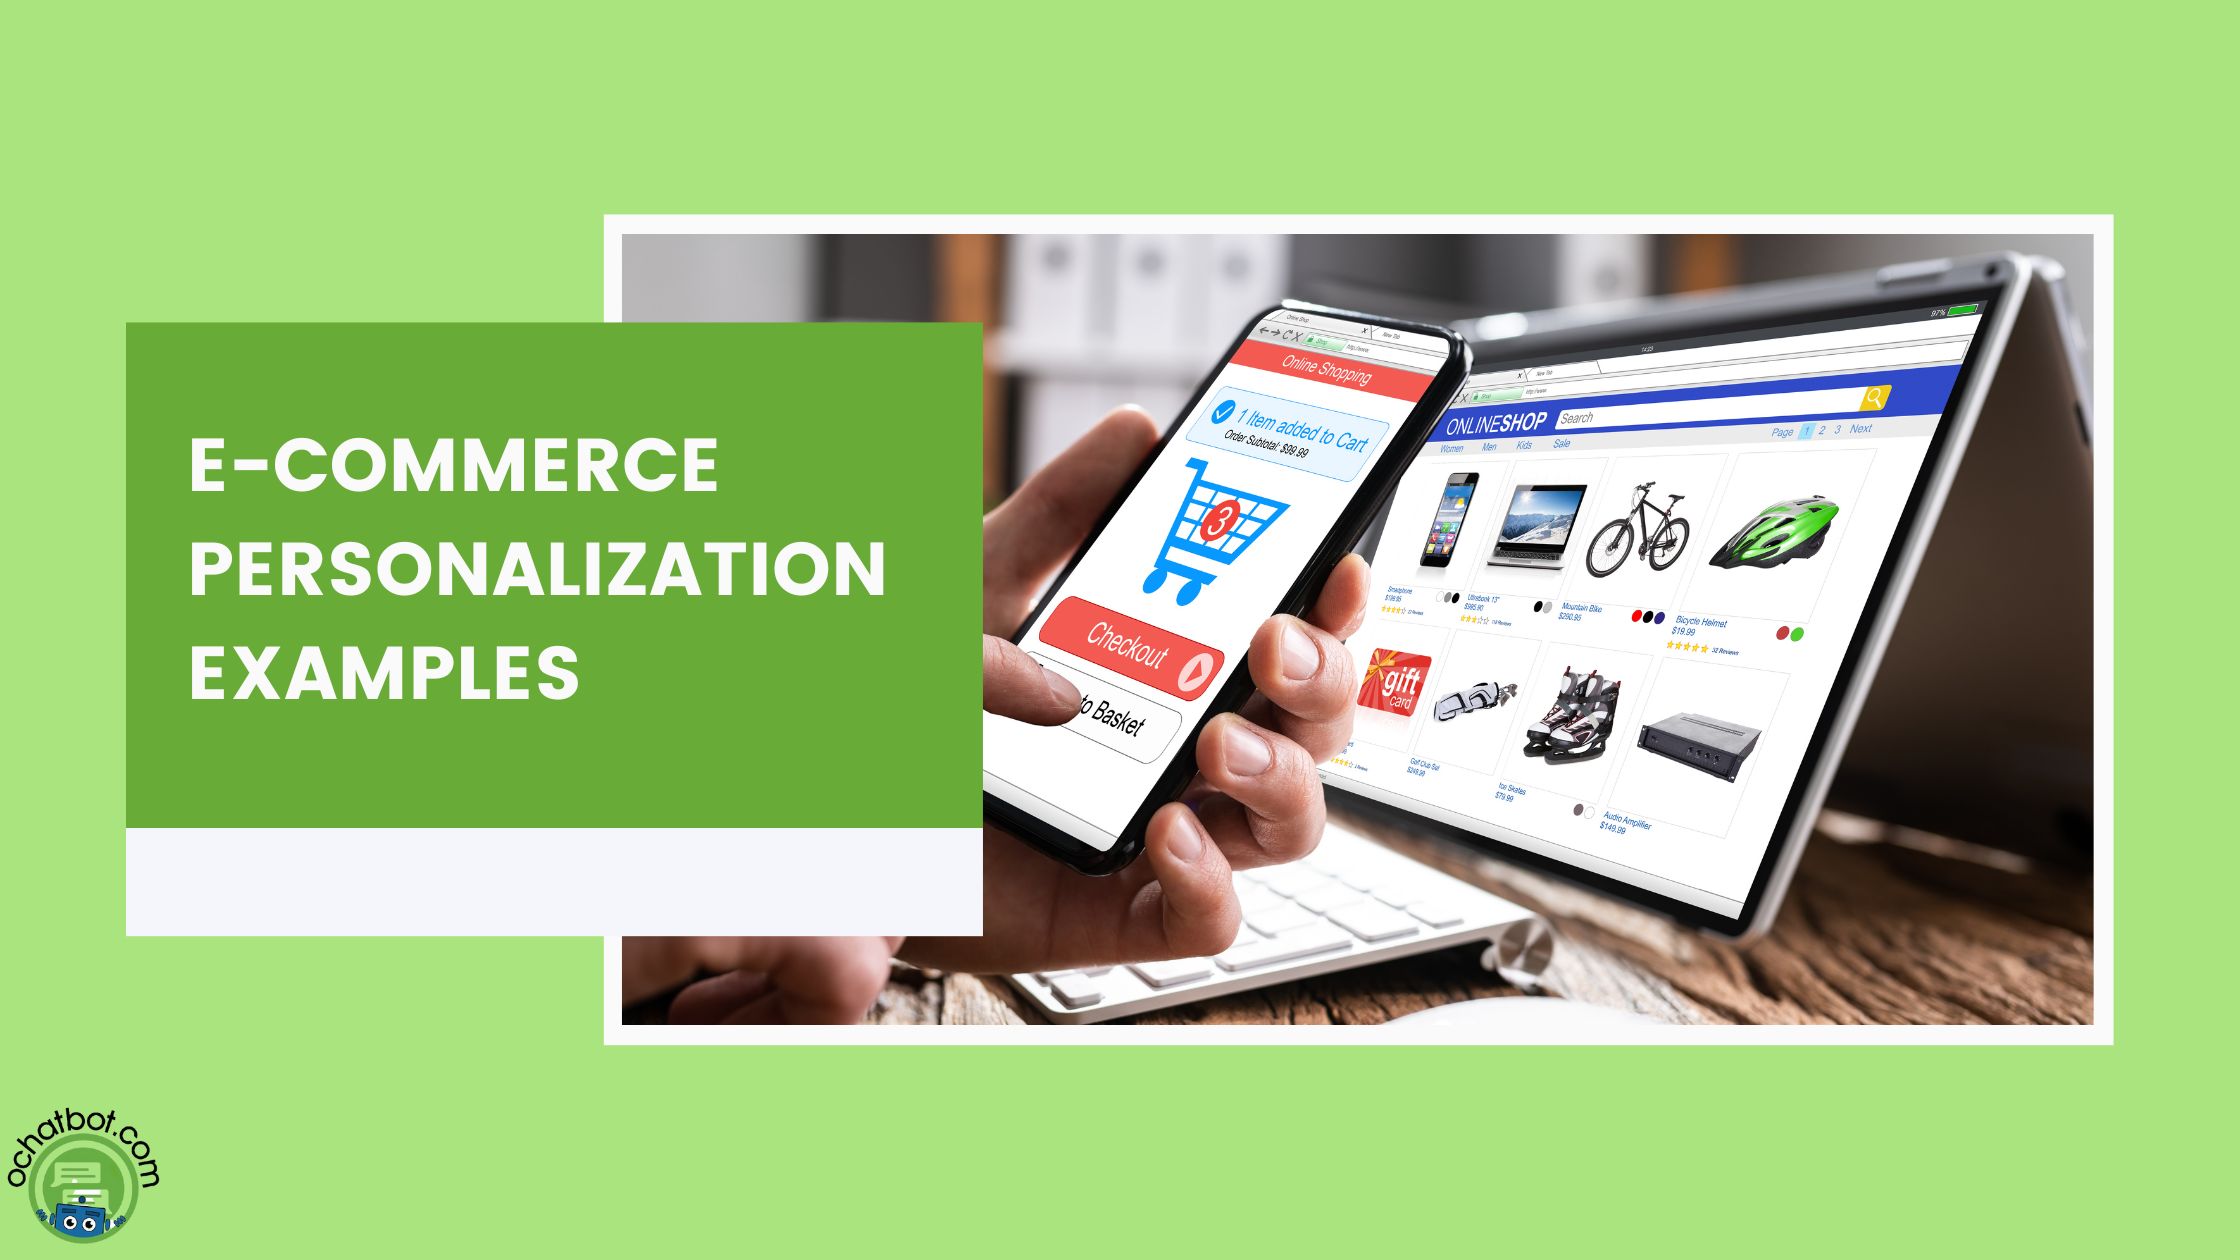 eCommerce personalization examples